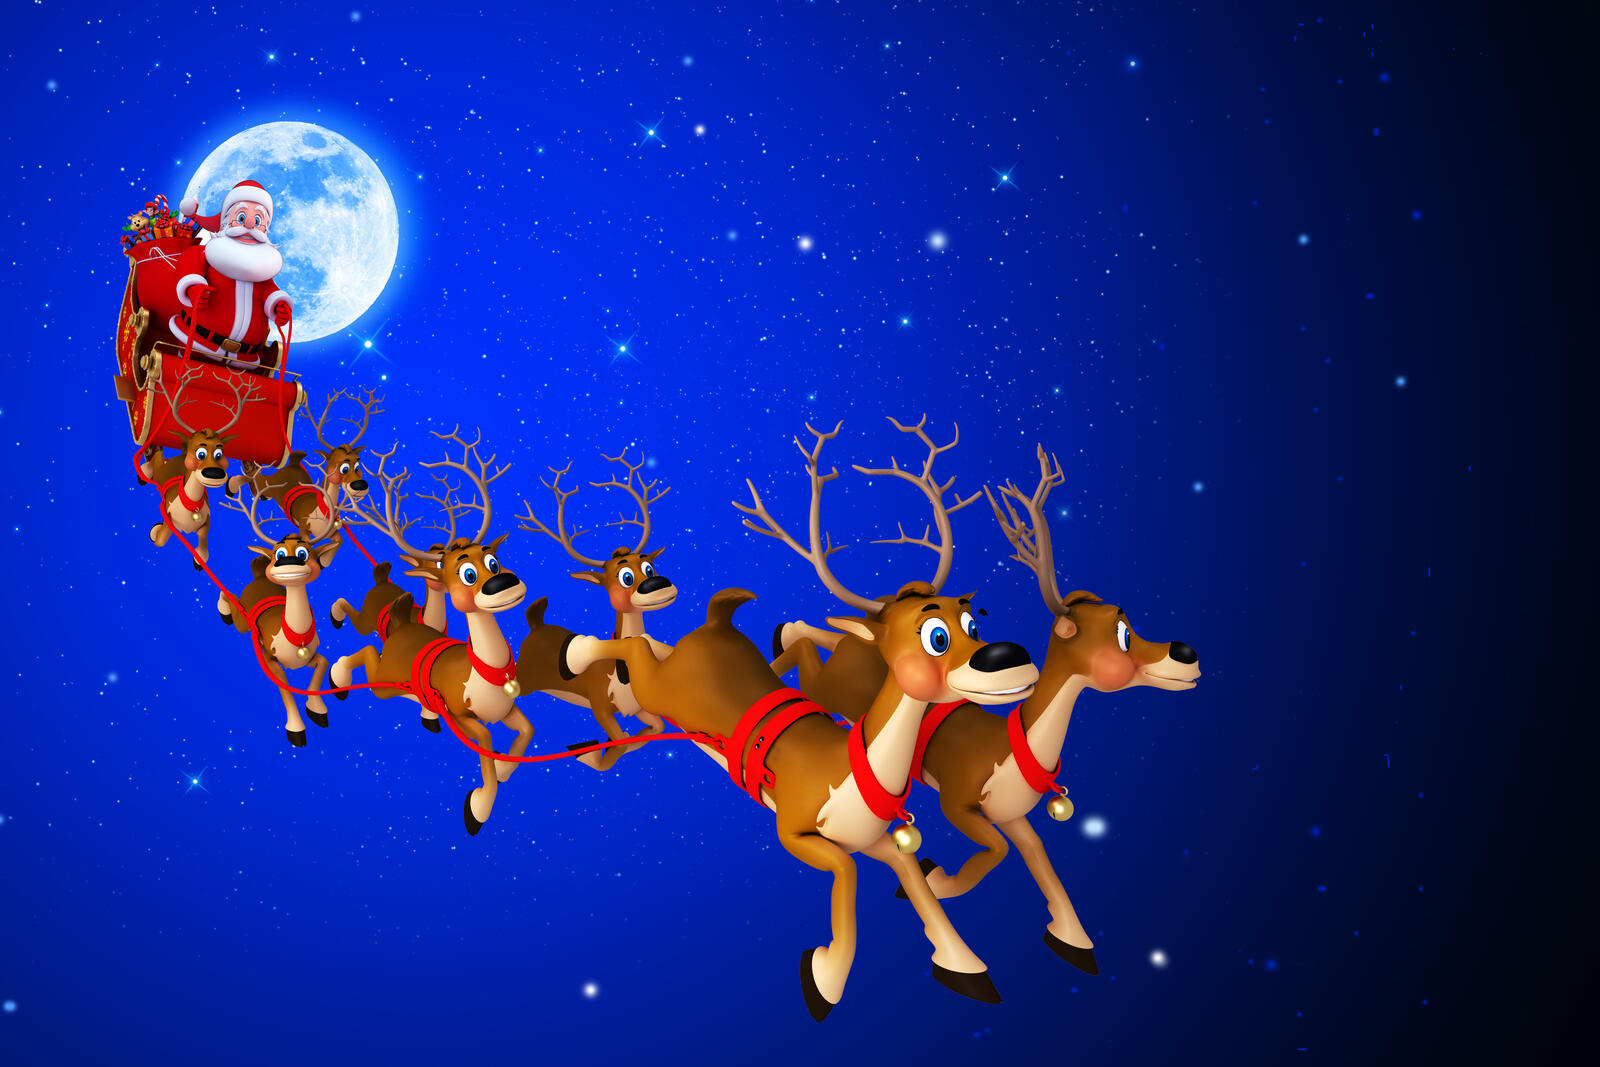 Wallpapers Christmas Santa Claus New Year s style on the desktop